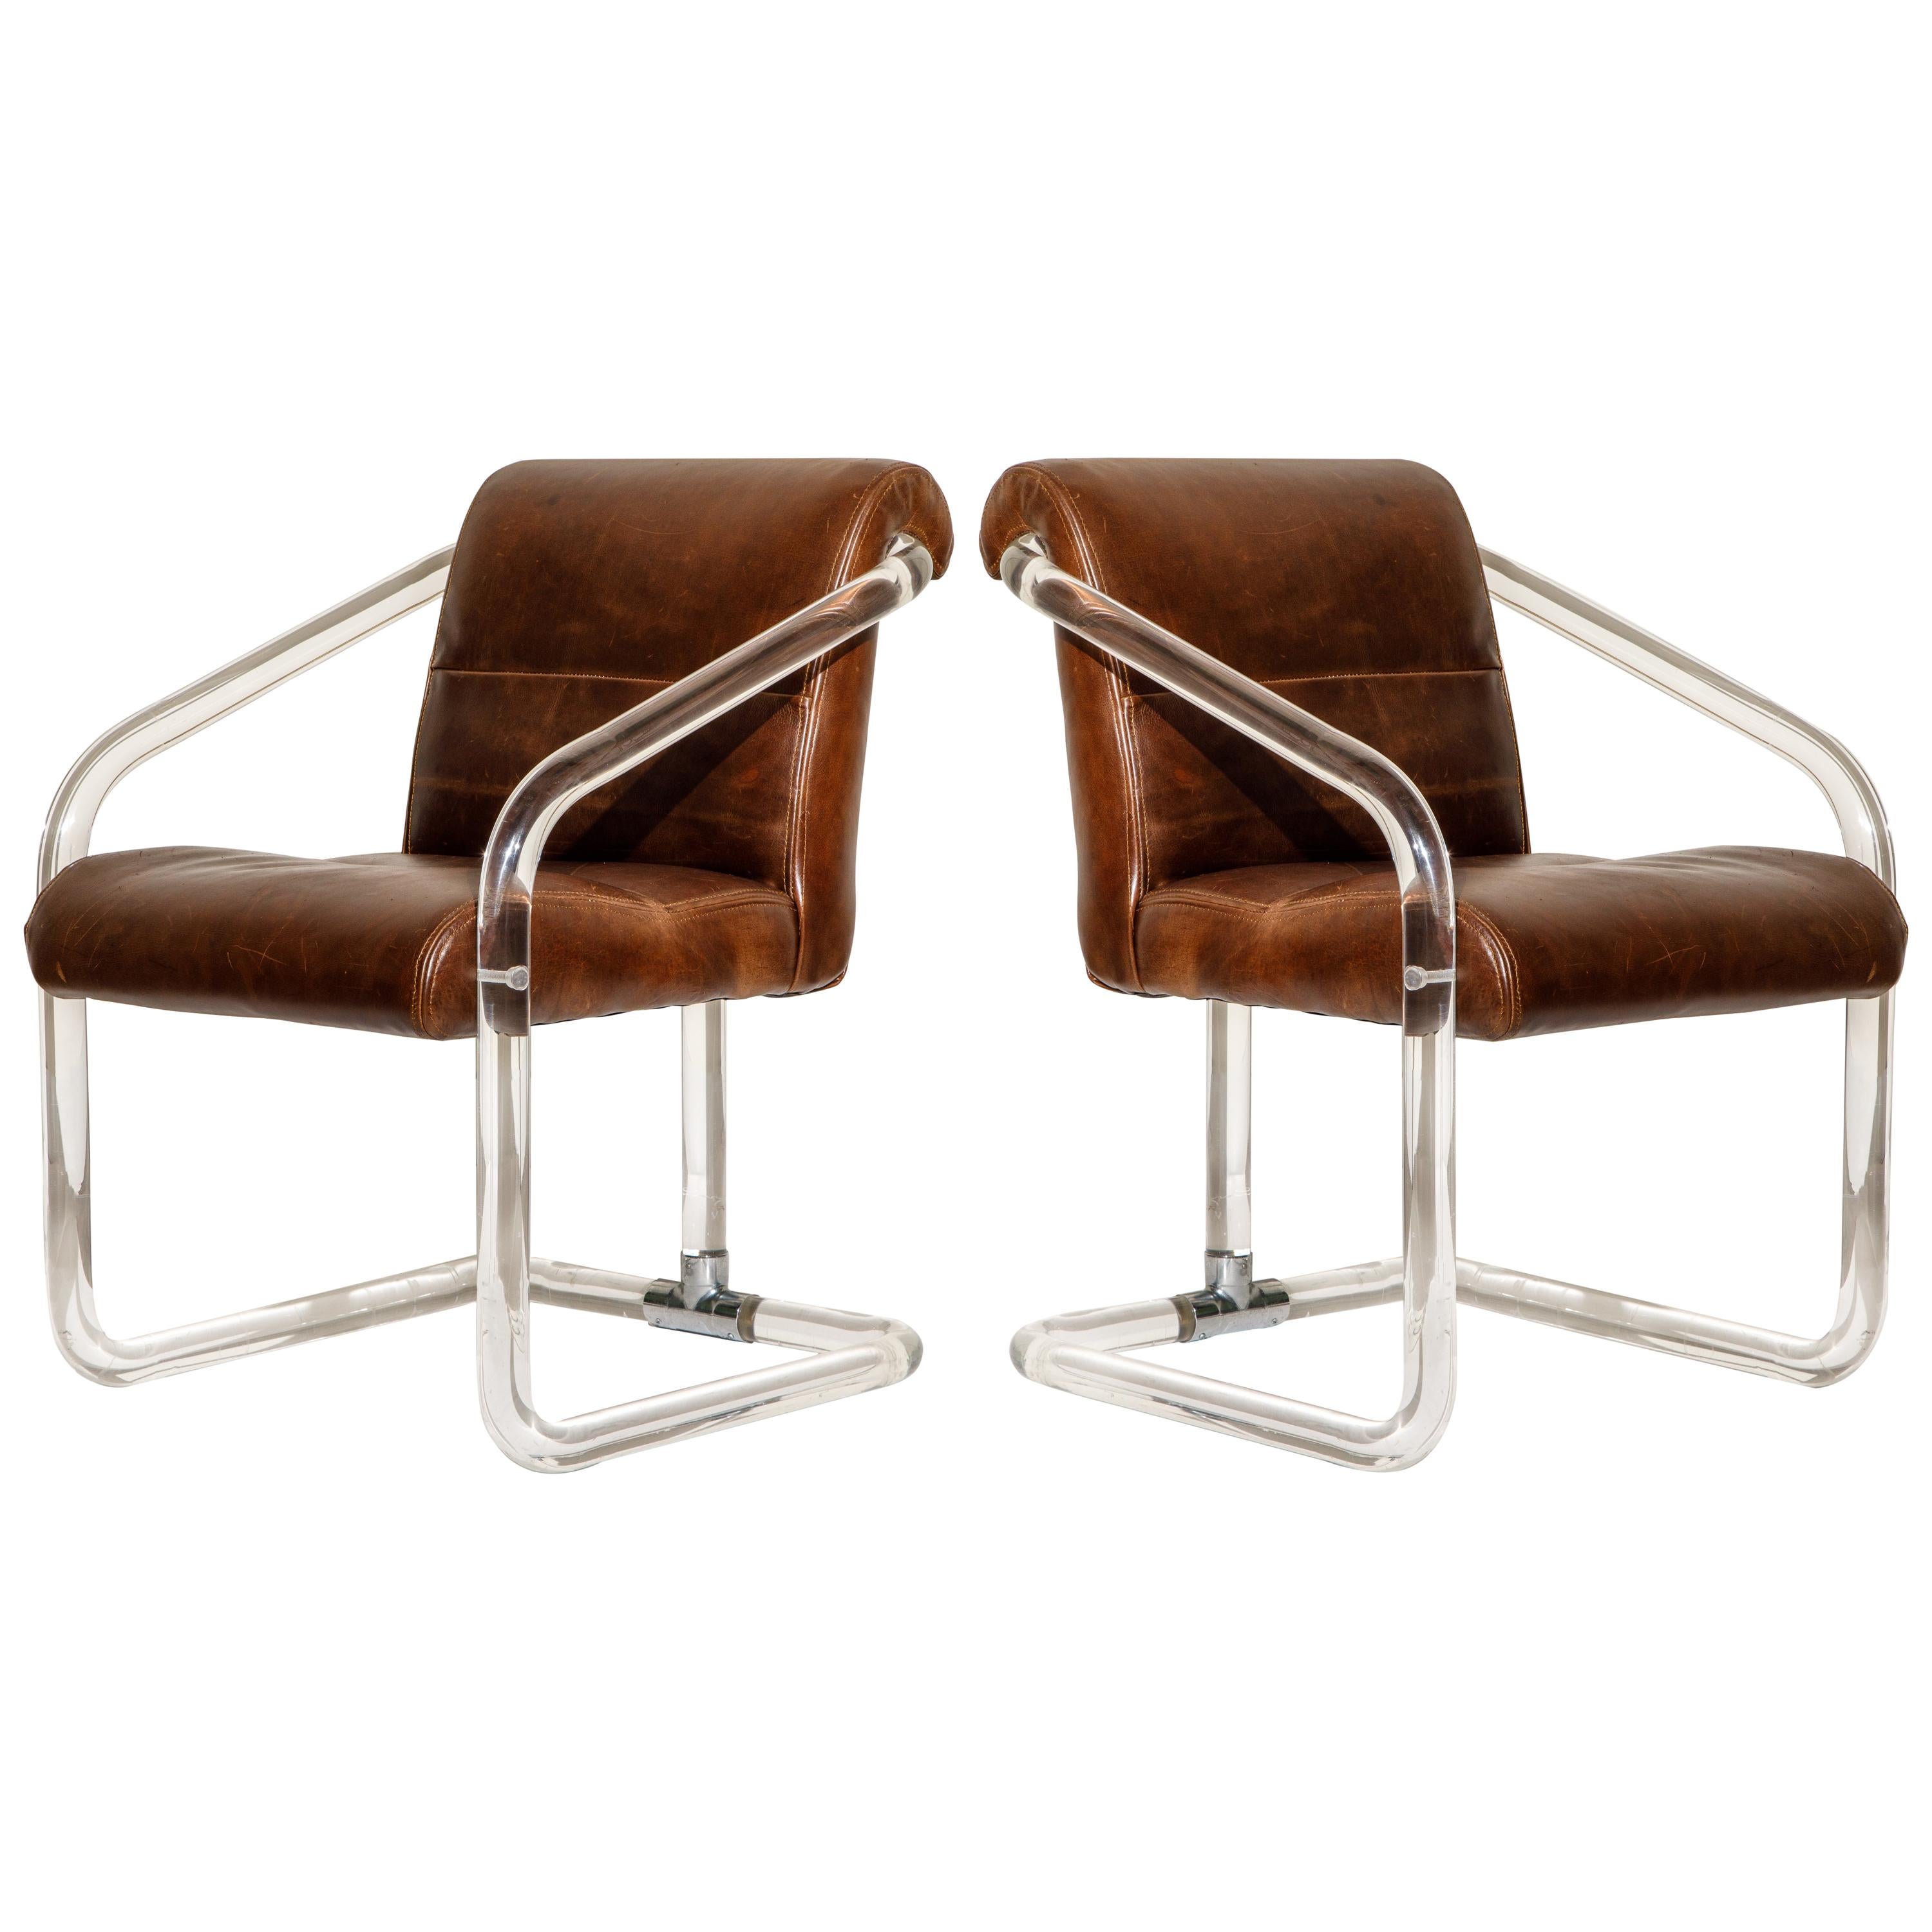 Pair of Lucite and Thick Leather Armchairs by Lion in Frost, c. 1970s Signed